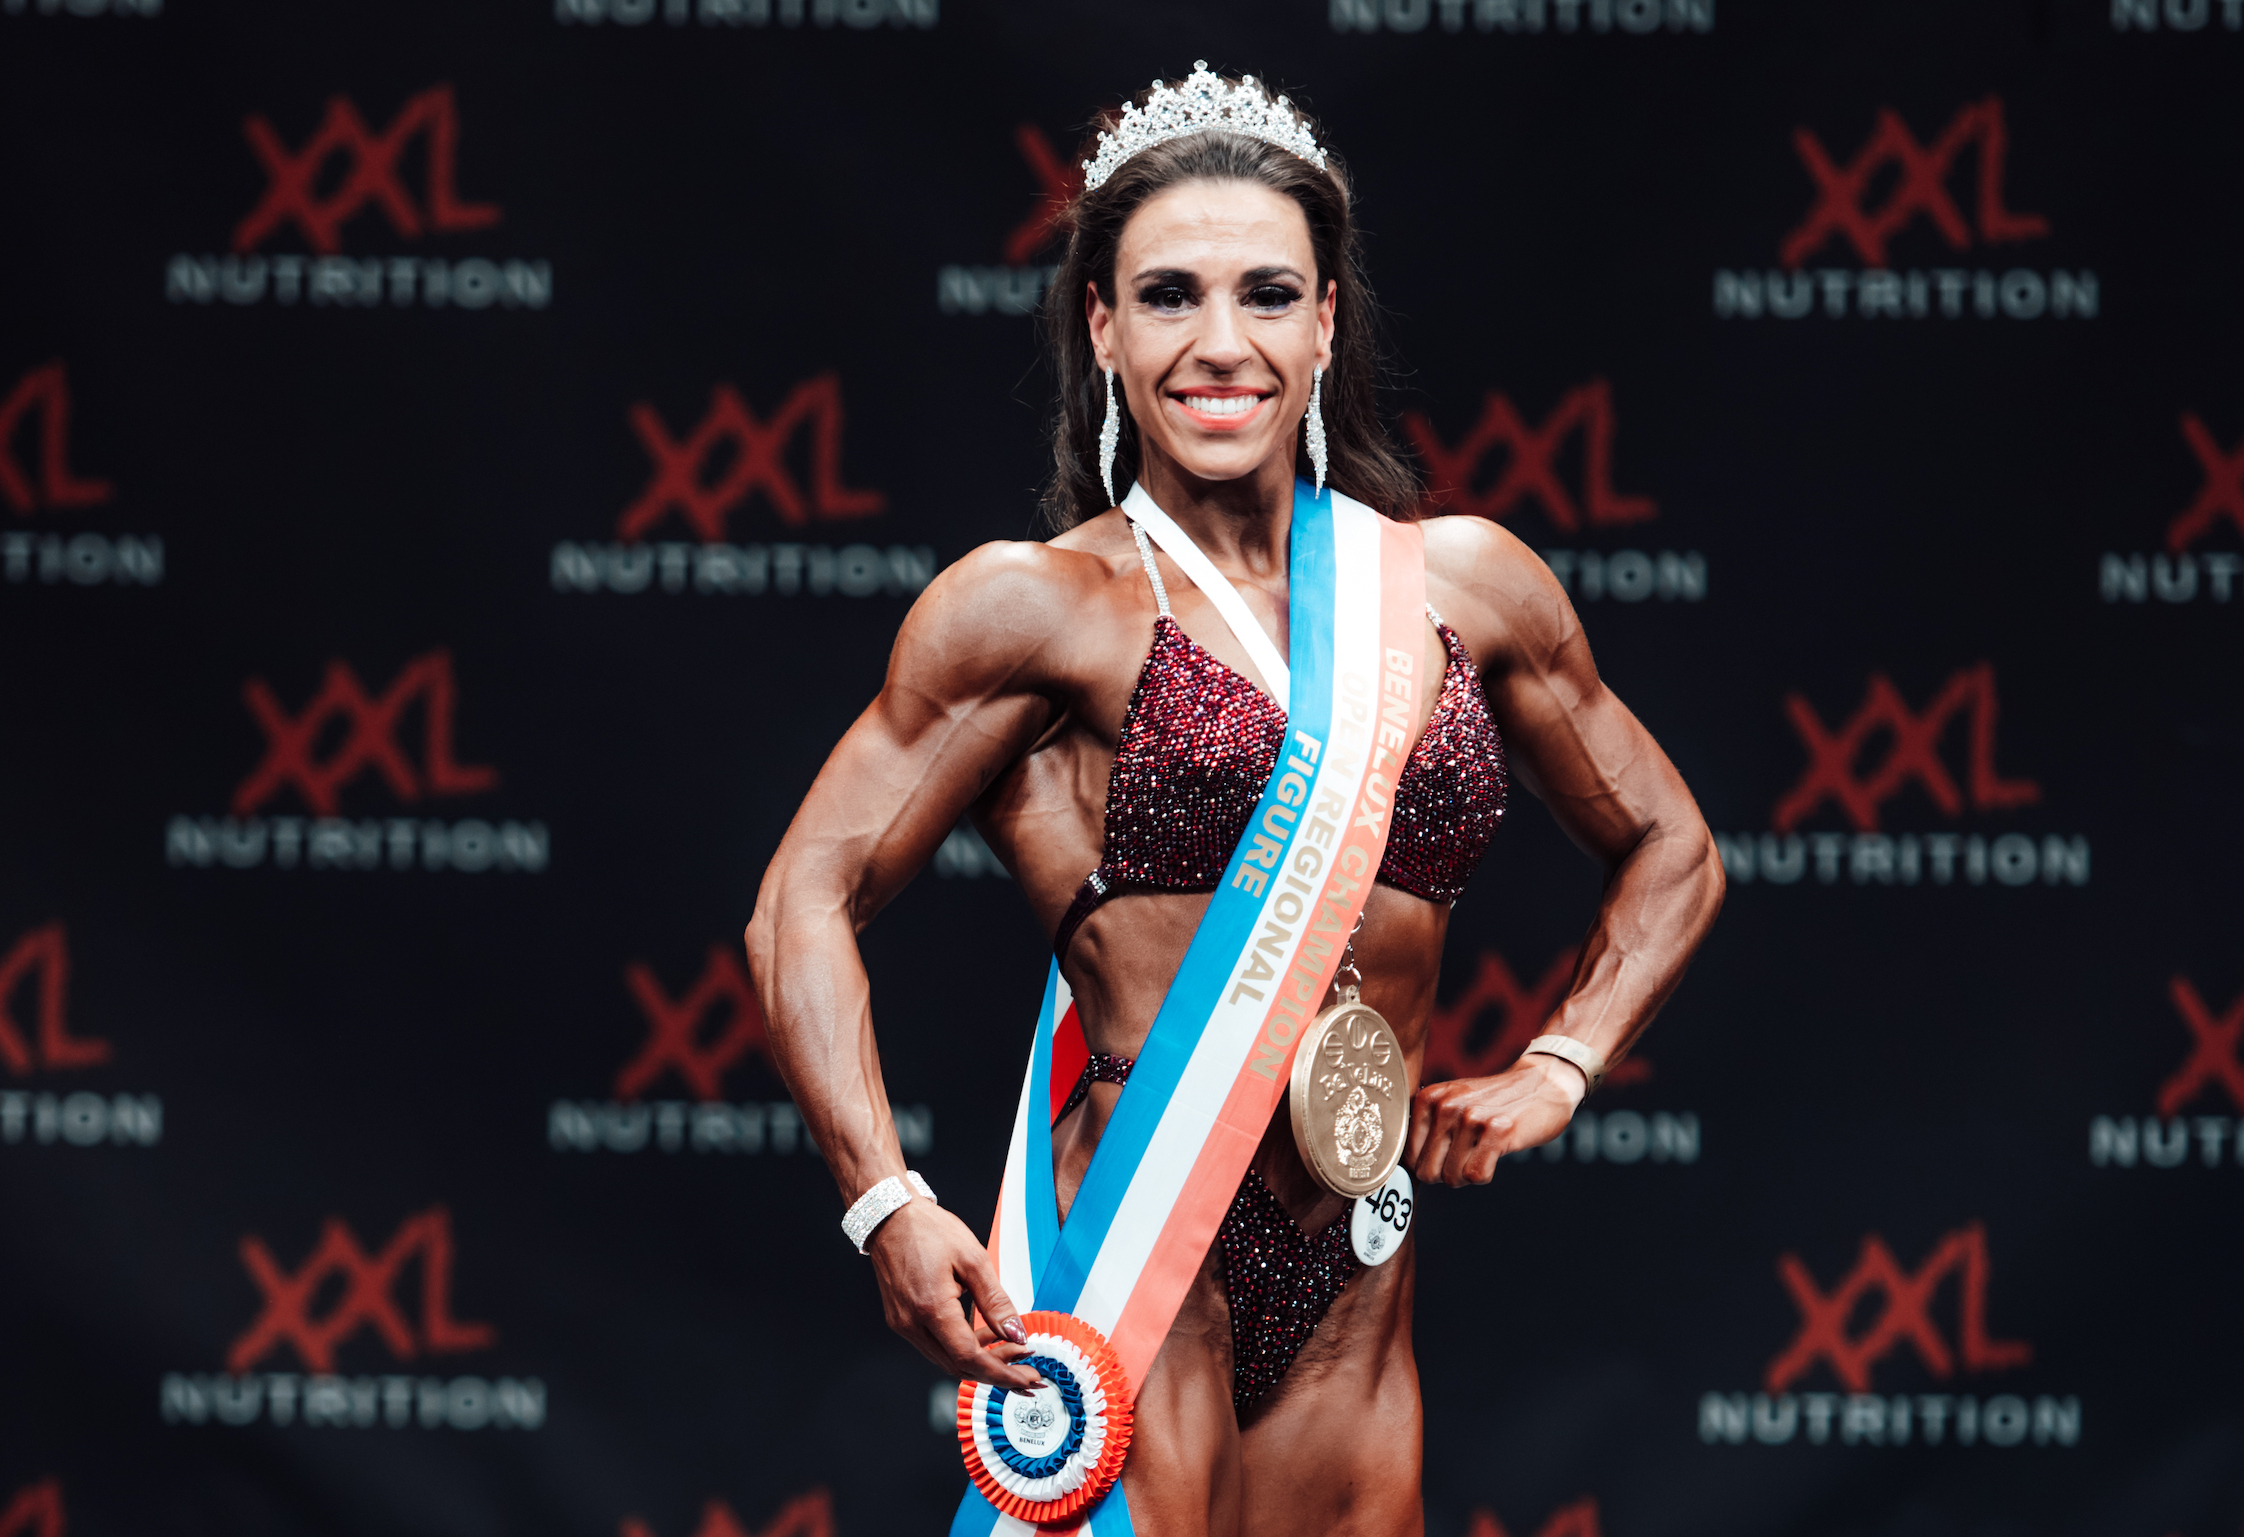 Anne will be competing for a ticket to bodybuilding heaven in America in December